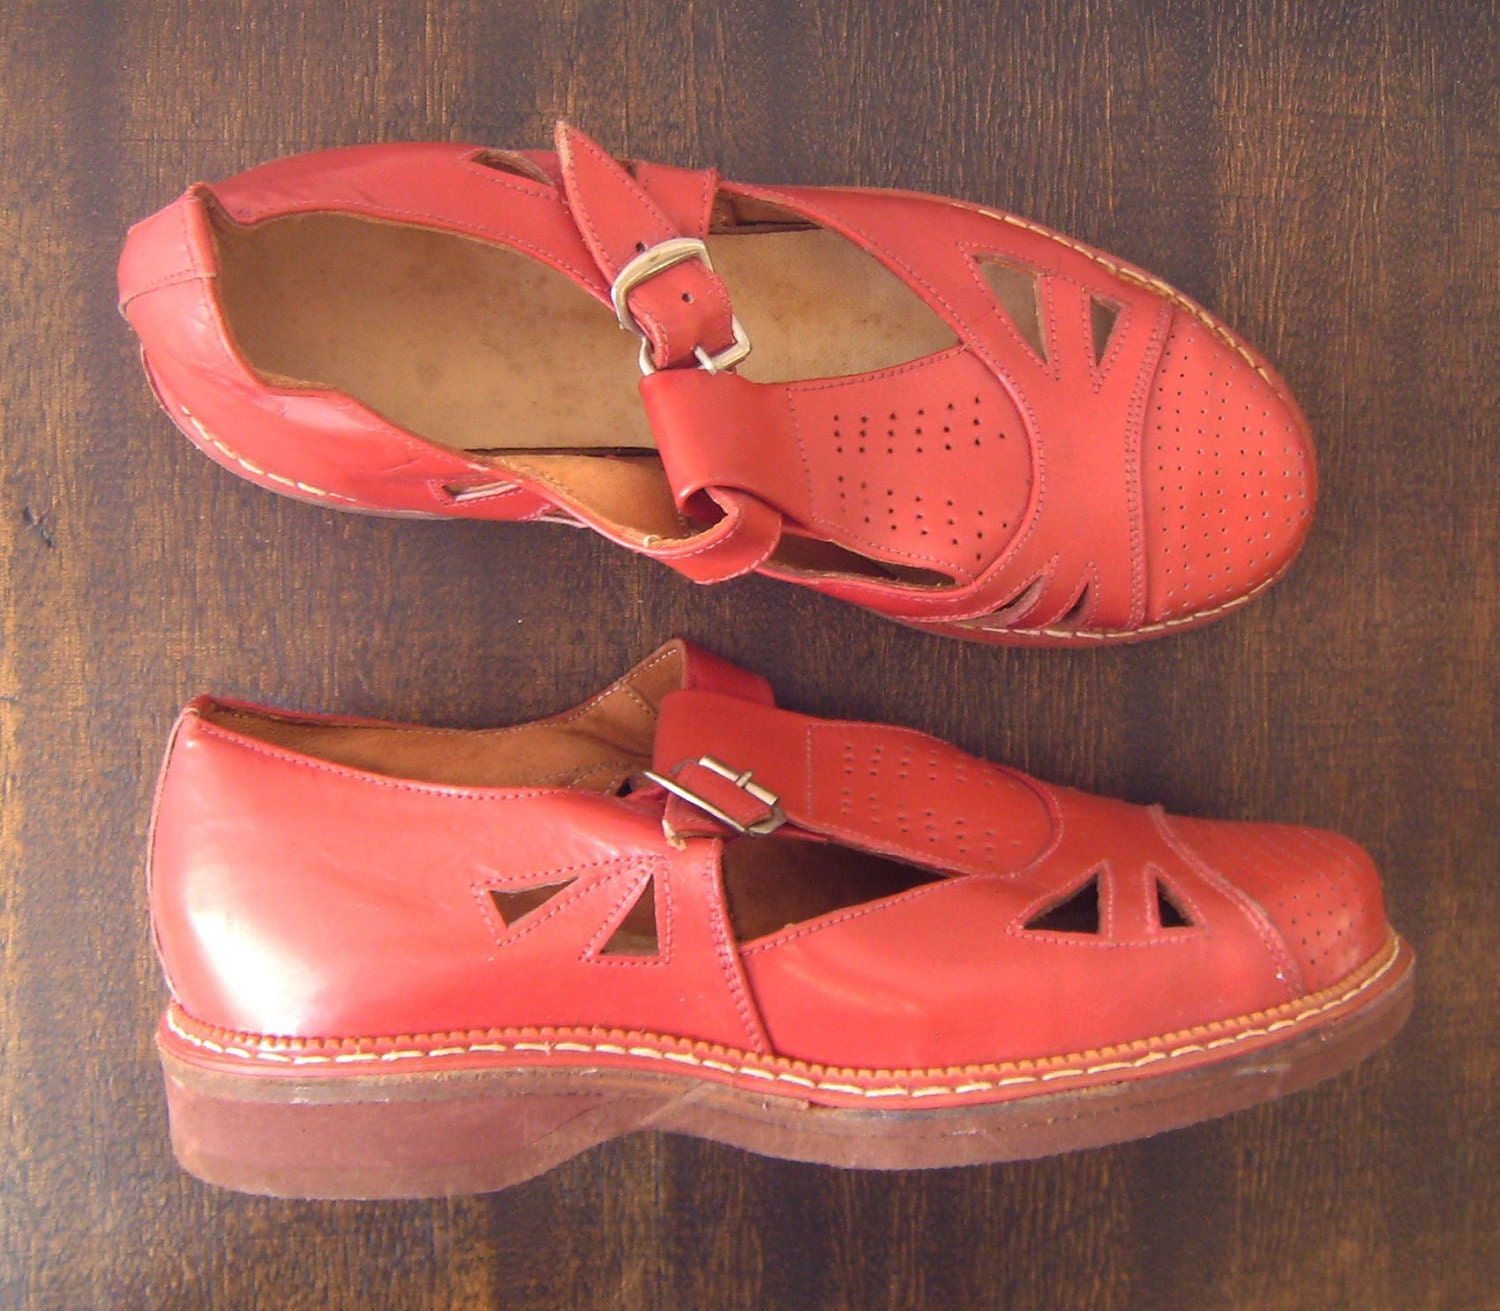 NOS 1940s 1950s vintage kids children shoes red leather for